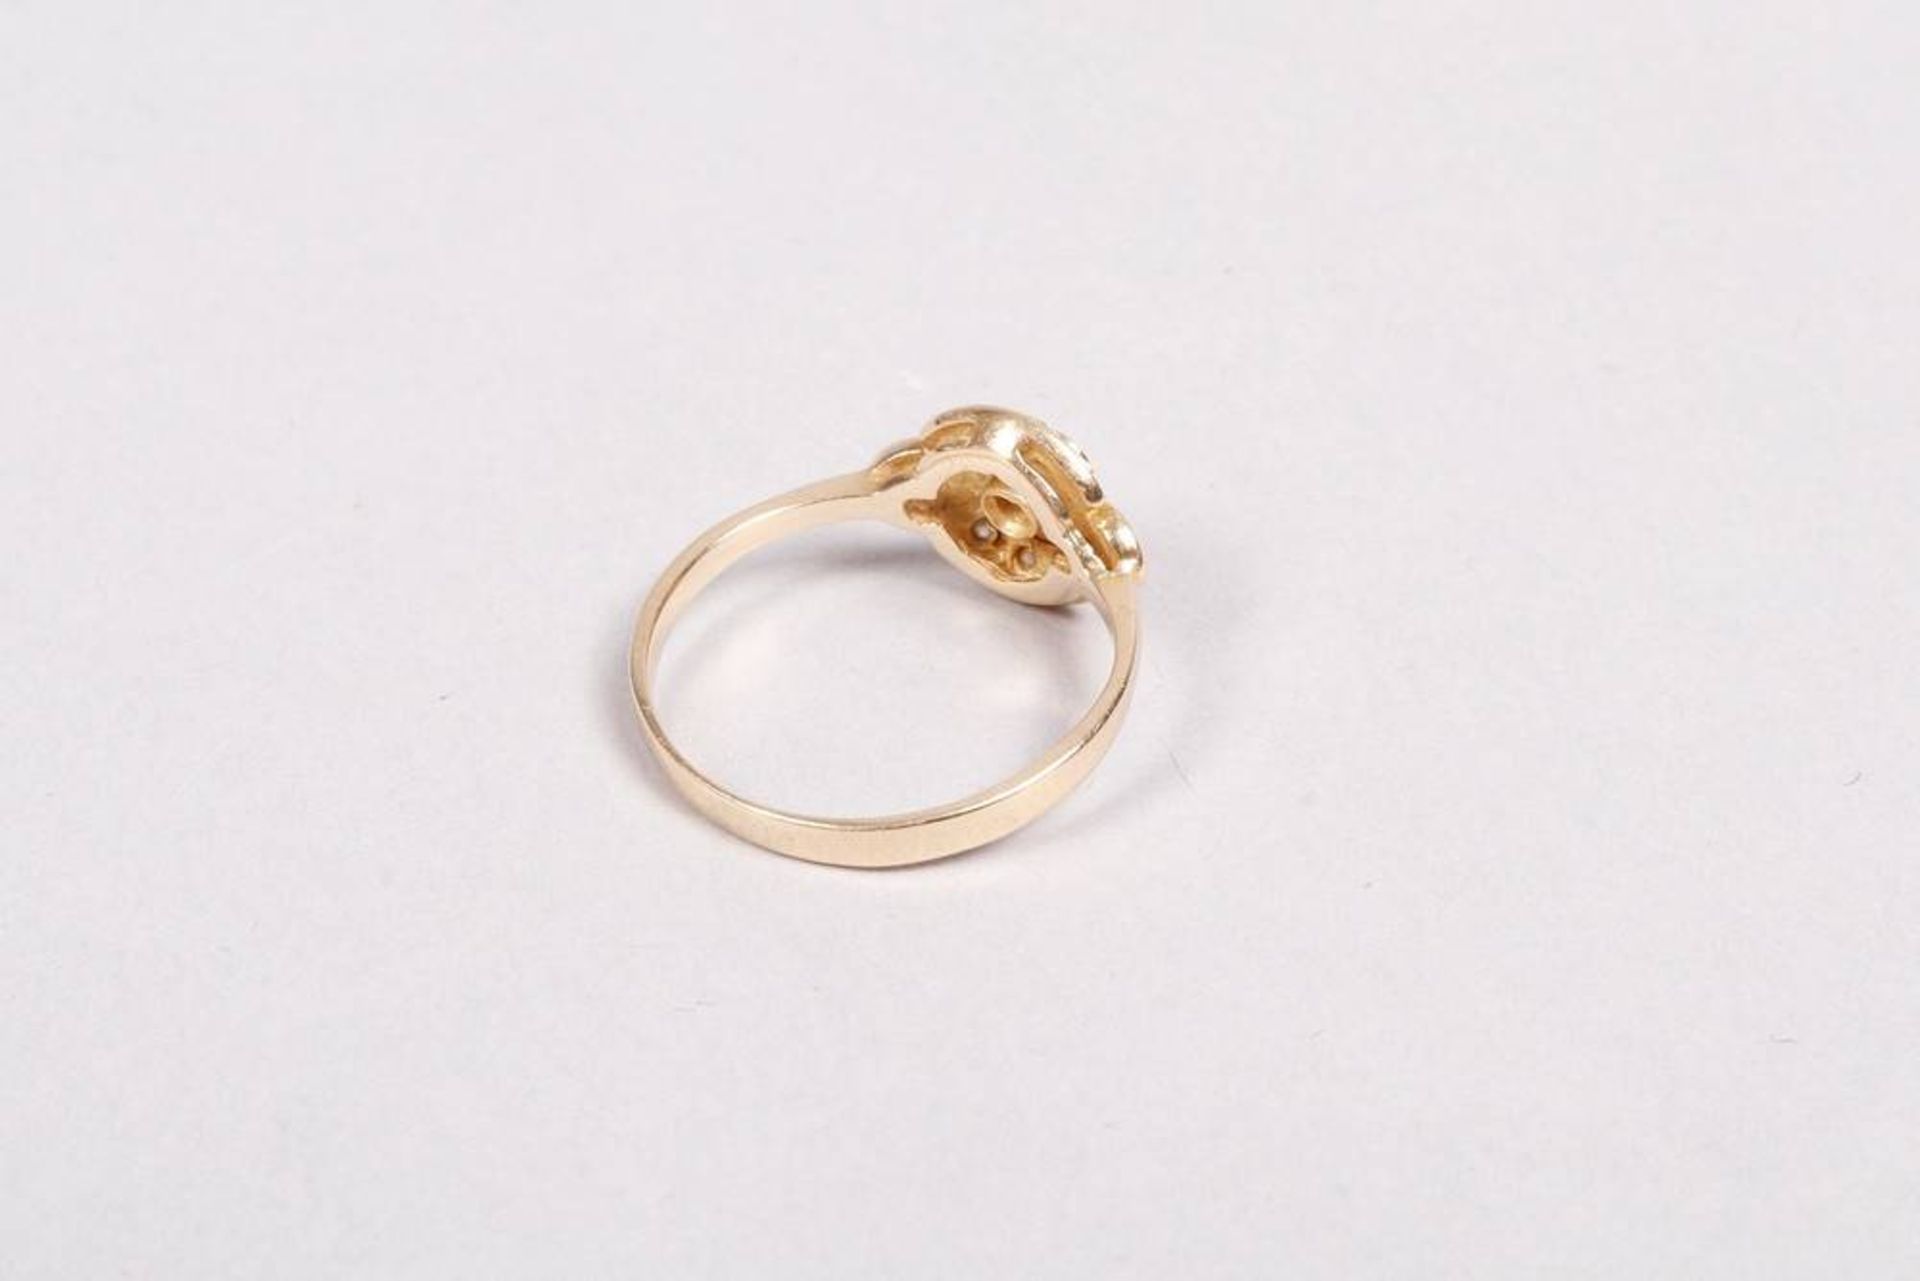 Art Deco ring, 585 yellow gold - Image 3 of 4